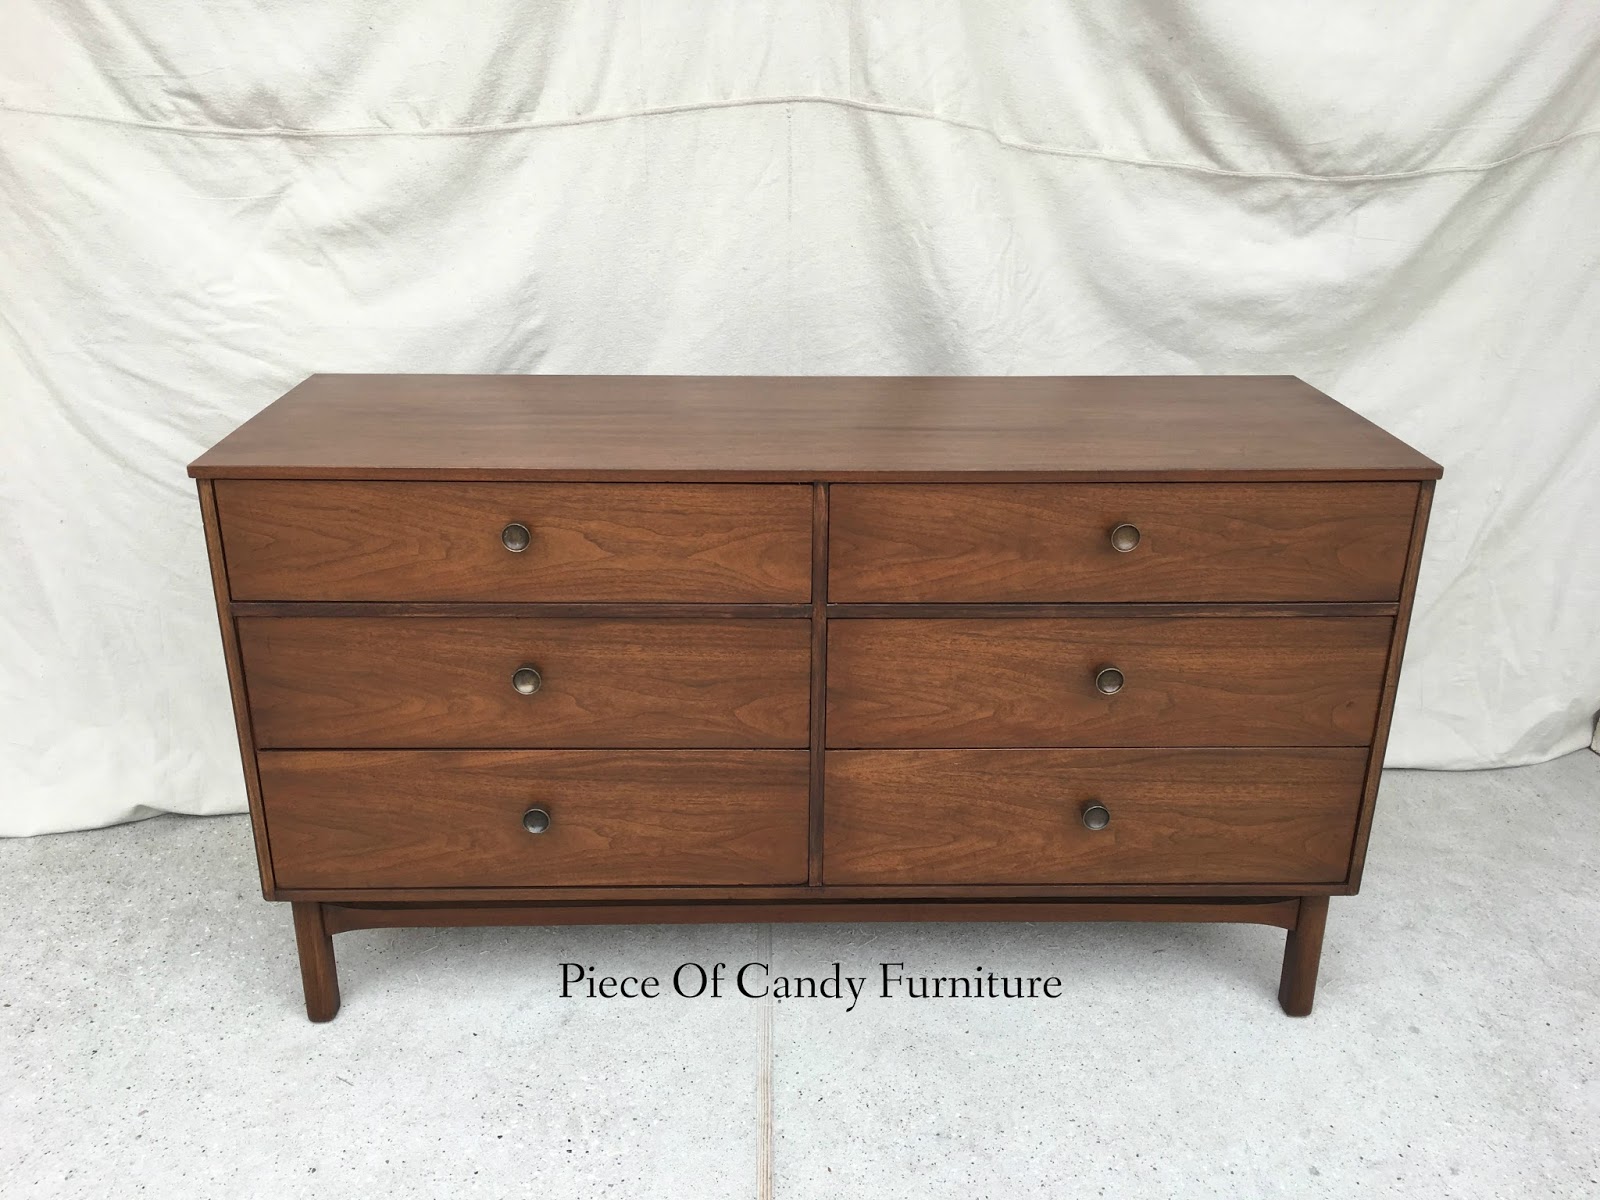 Piece Of Candy Furniture Refinished Mid Century Dresser